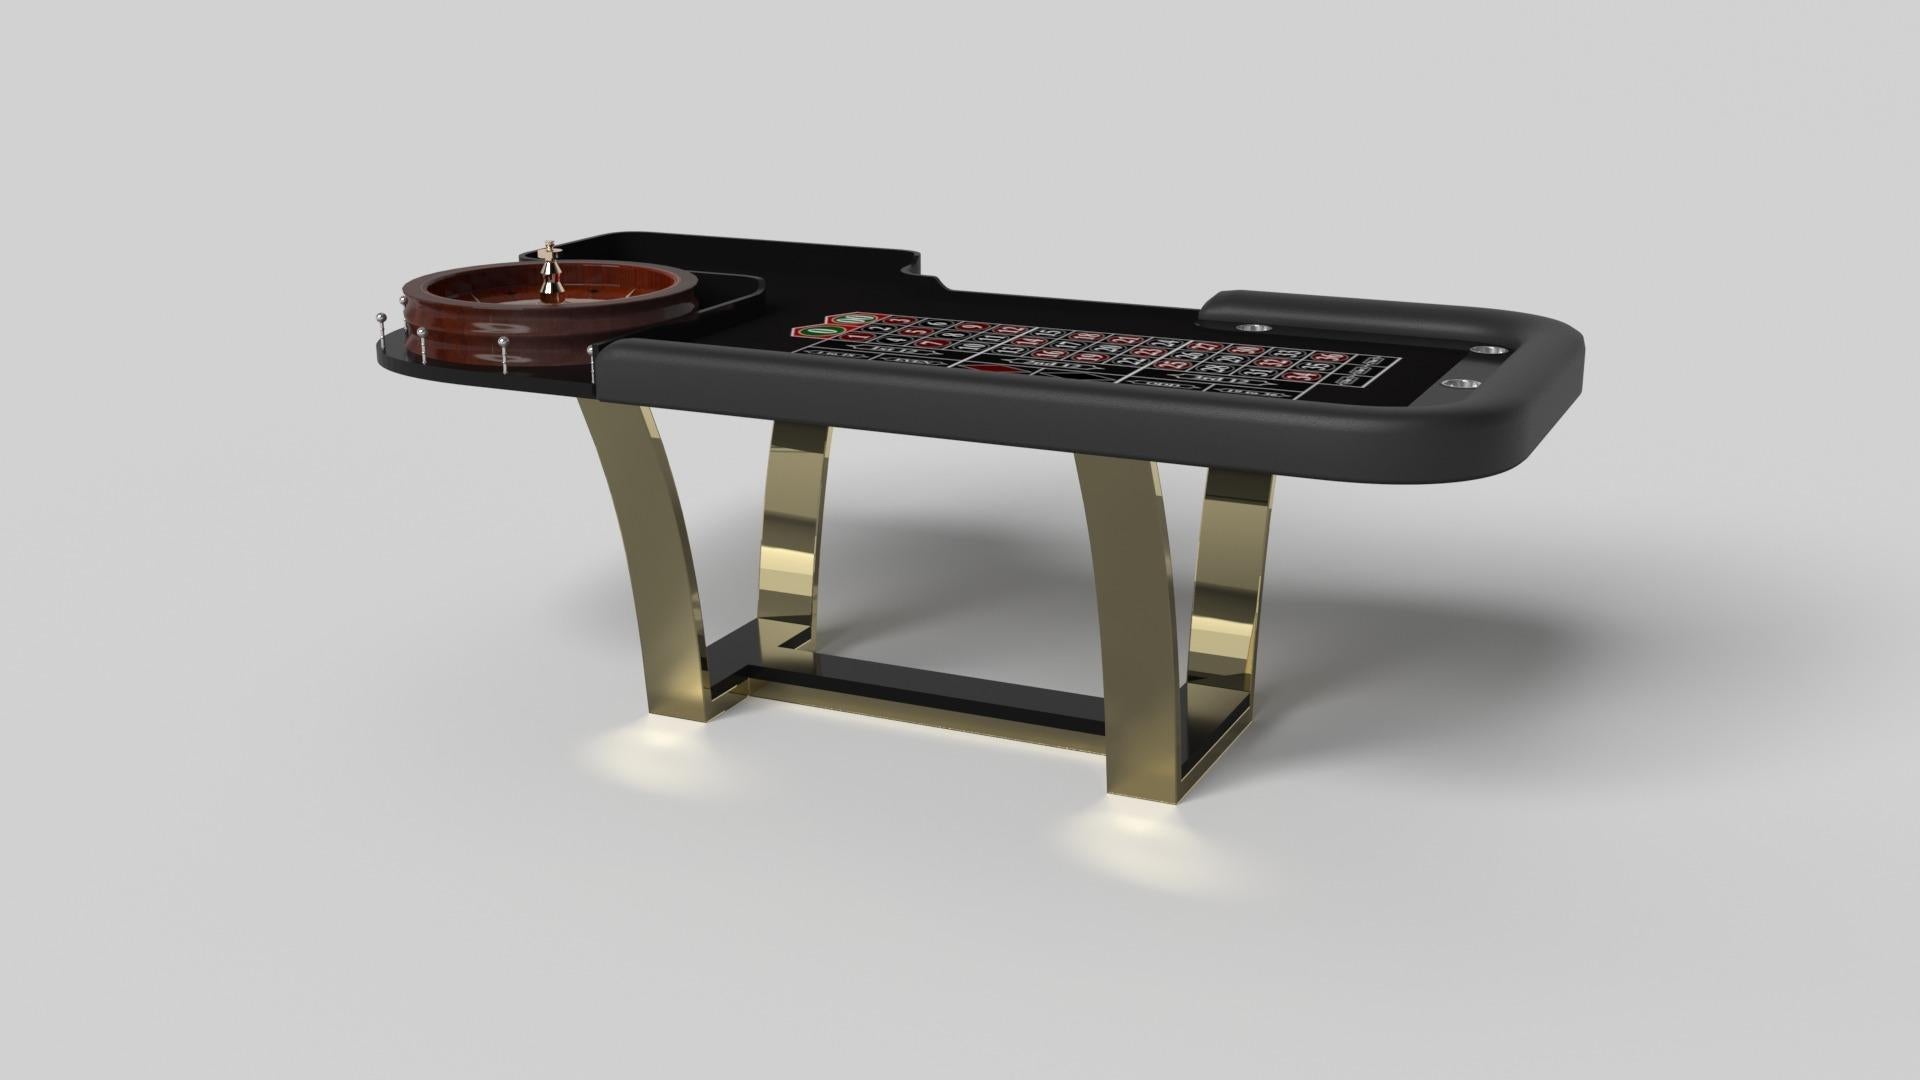 With an I-shaped metal base, slightly sloped metal legs, and a contrasting wood top, the Elite roulette table exudes modern sophistication while evoking a sense of art deco design. This table is a confluence of style, made to meet today's demands